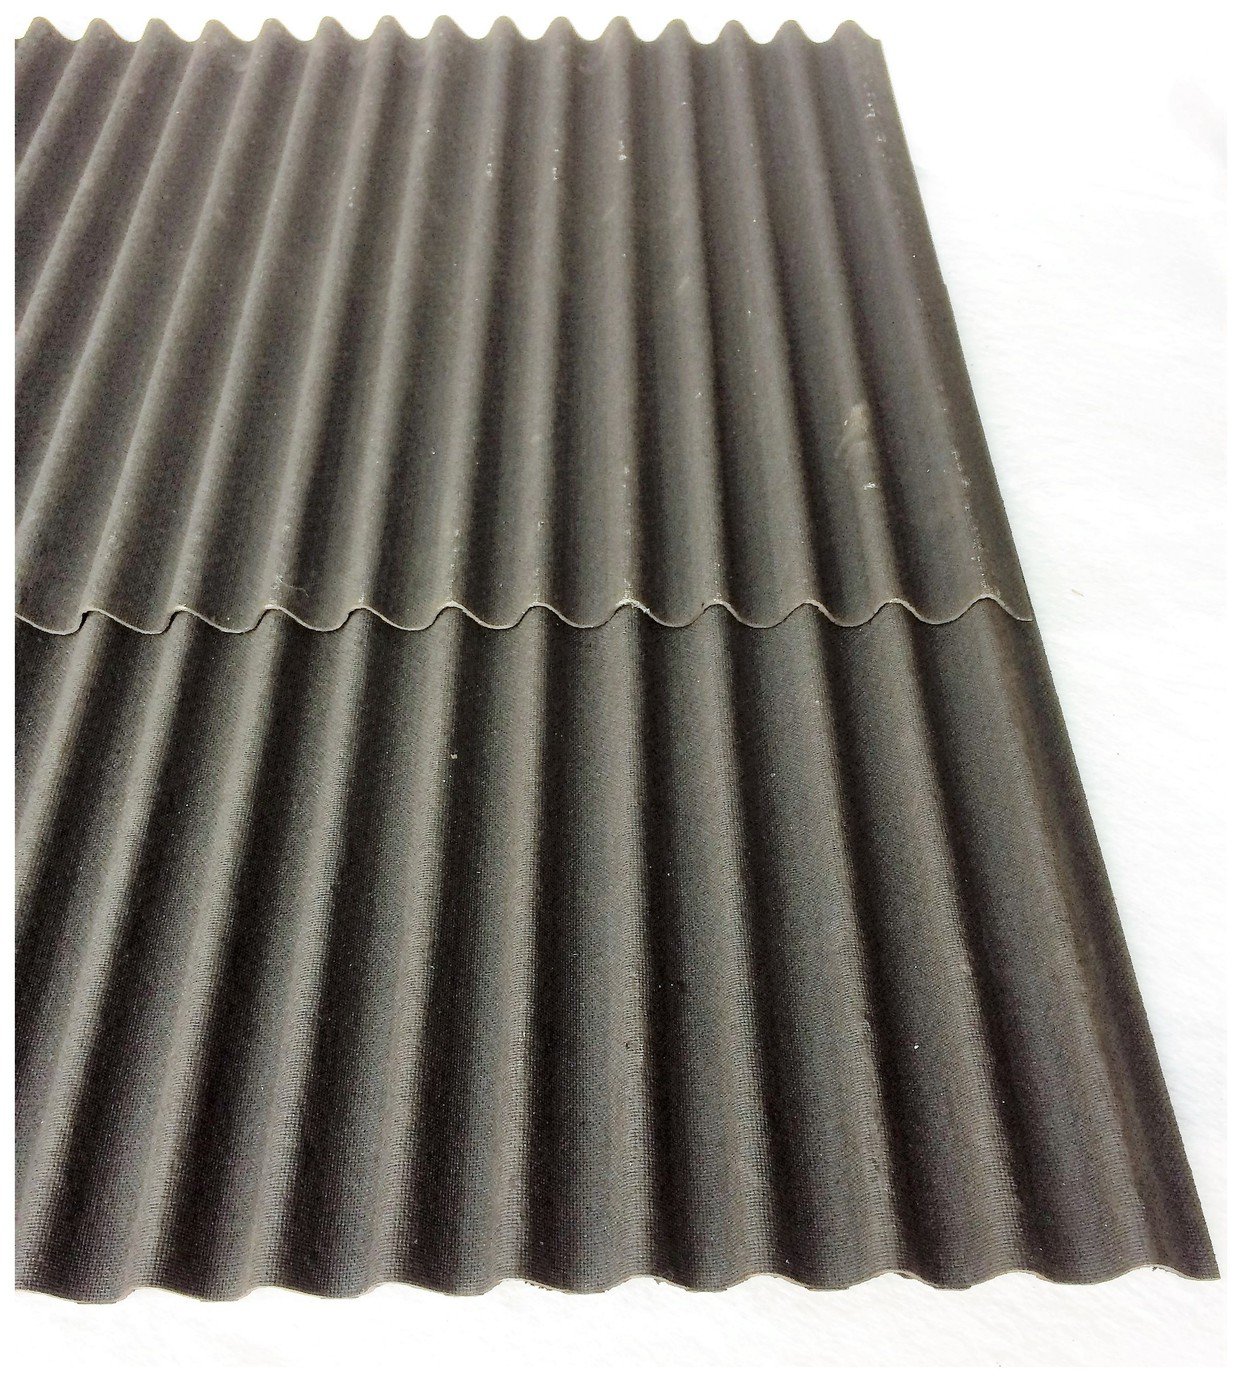 Watershed Bituminous Roofing Kit - 8 x 12ft